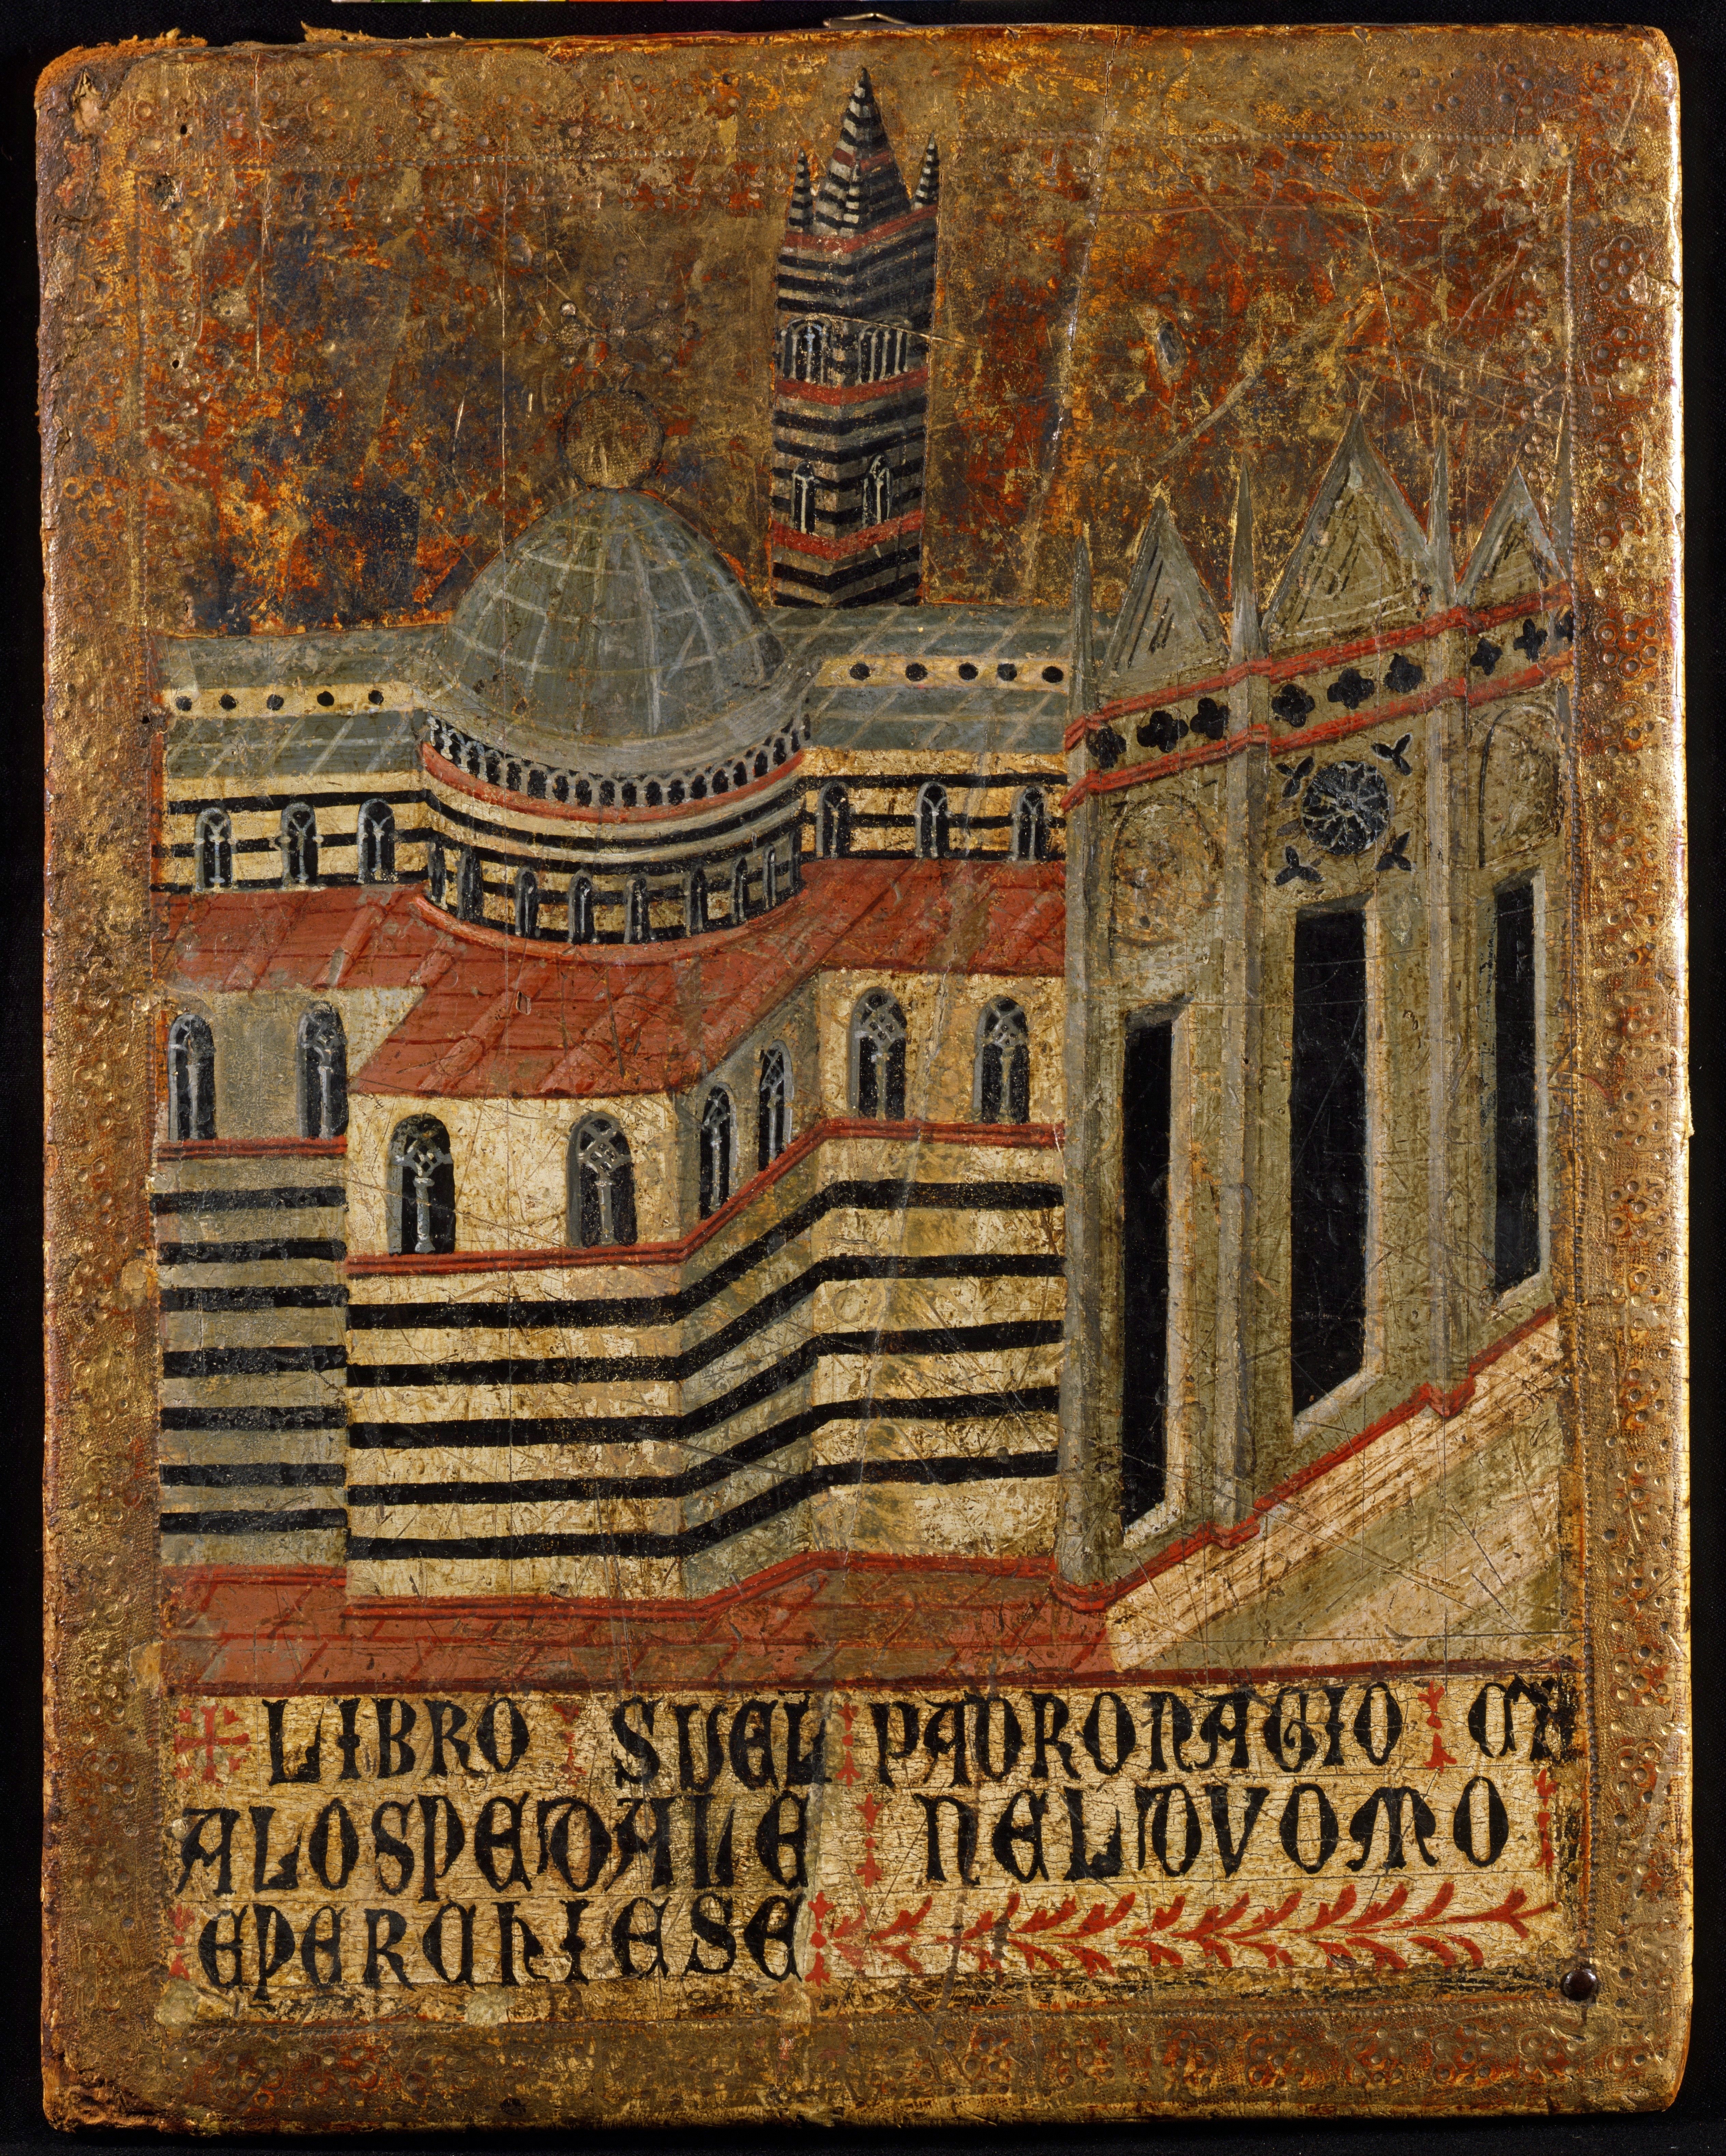 Wooden cover of a register of the Biccherna, an organ of Sienese government, with a depiction of the city's cathedral, last quarter of the 14th century (Siena State Archives, Biccherne)